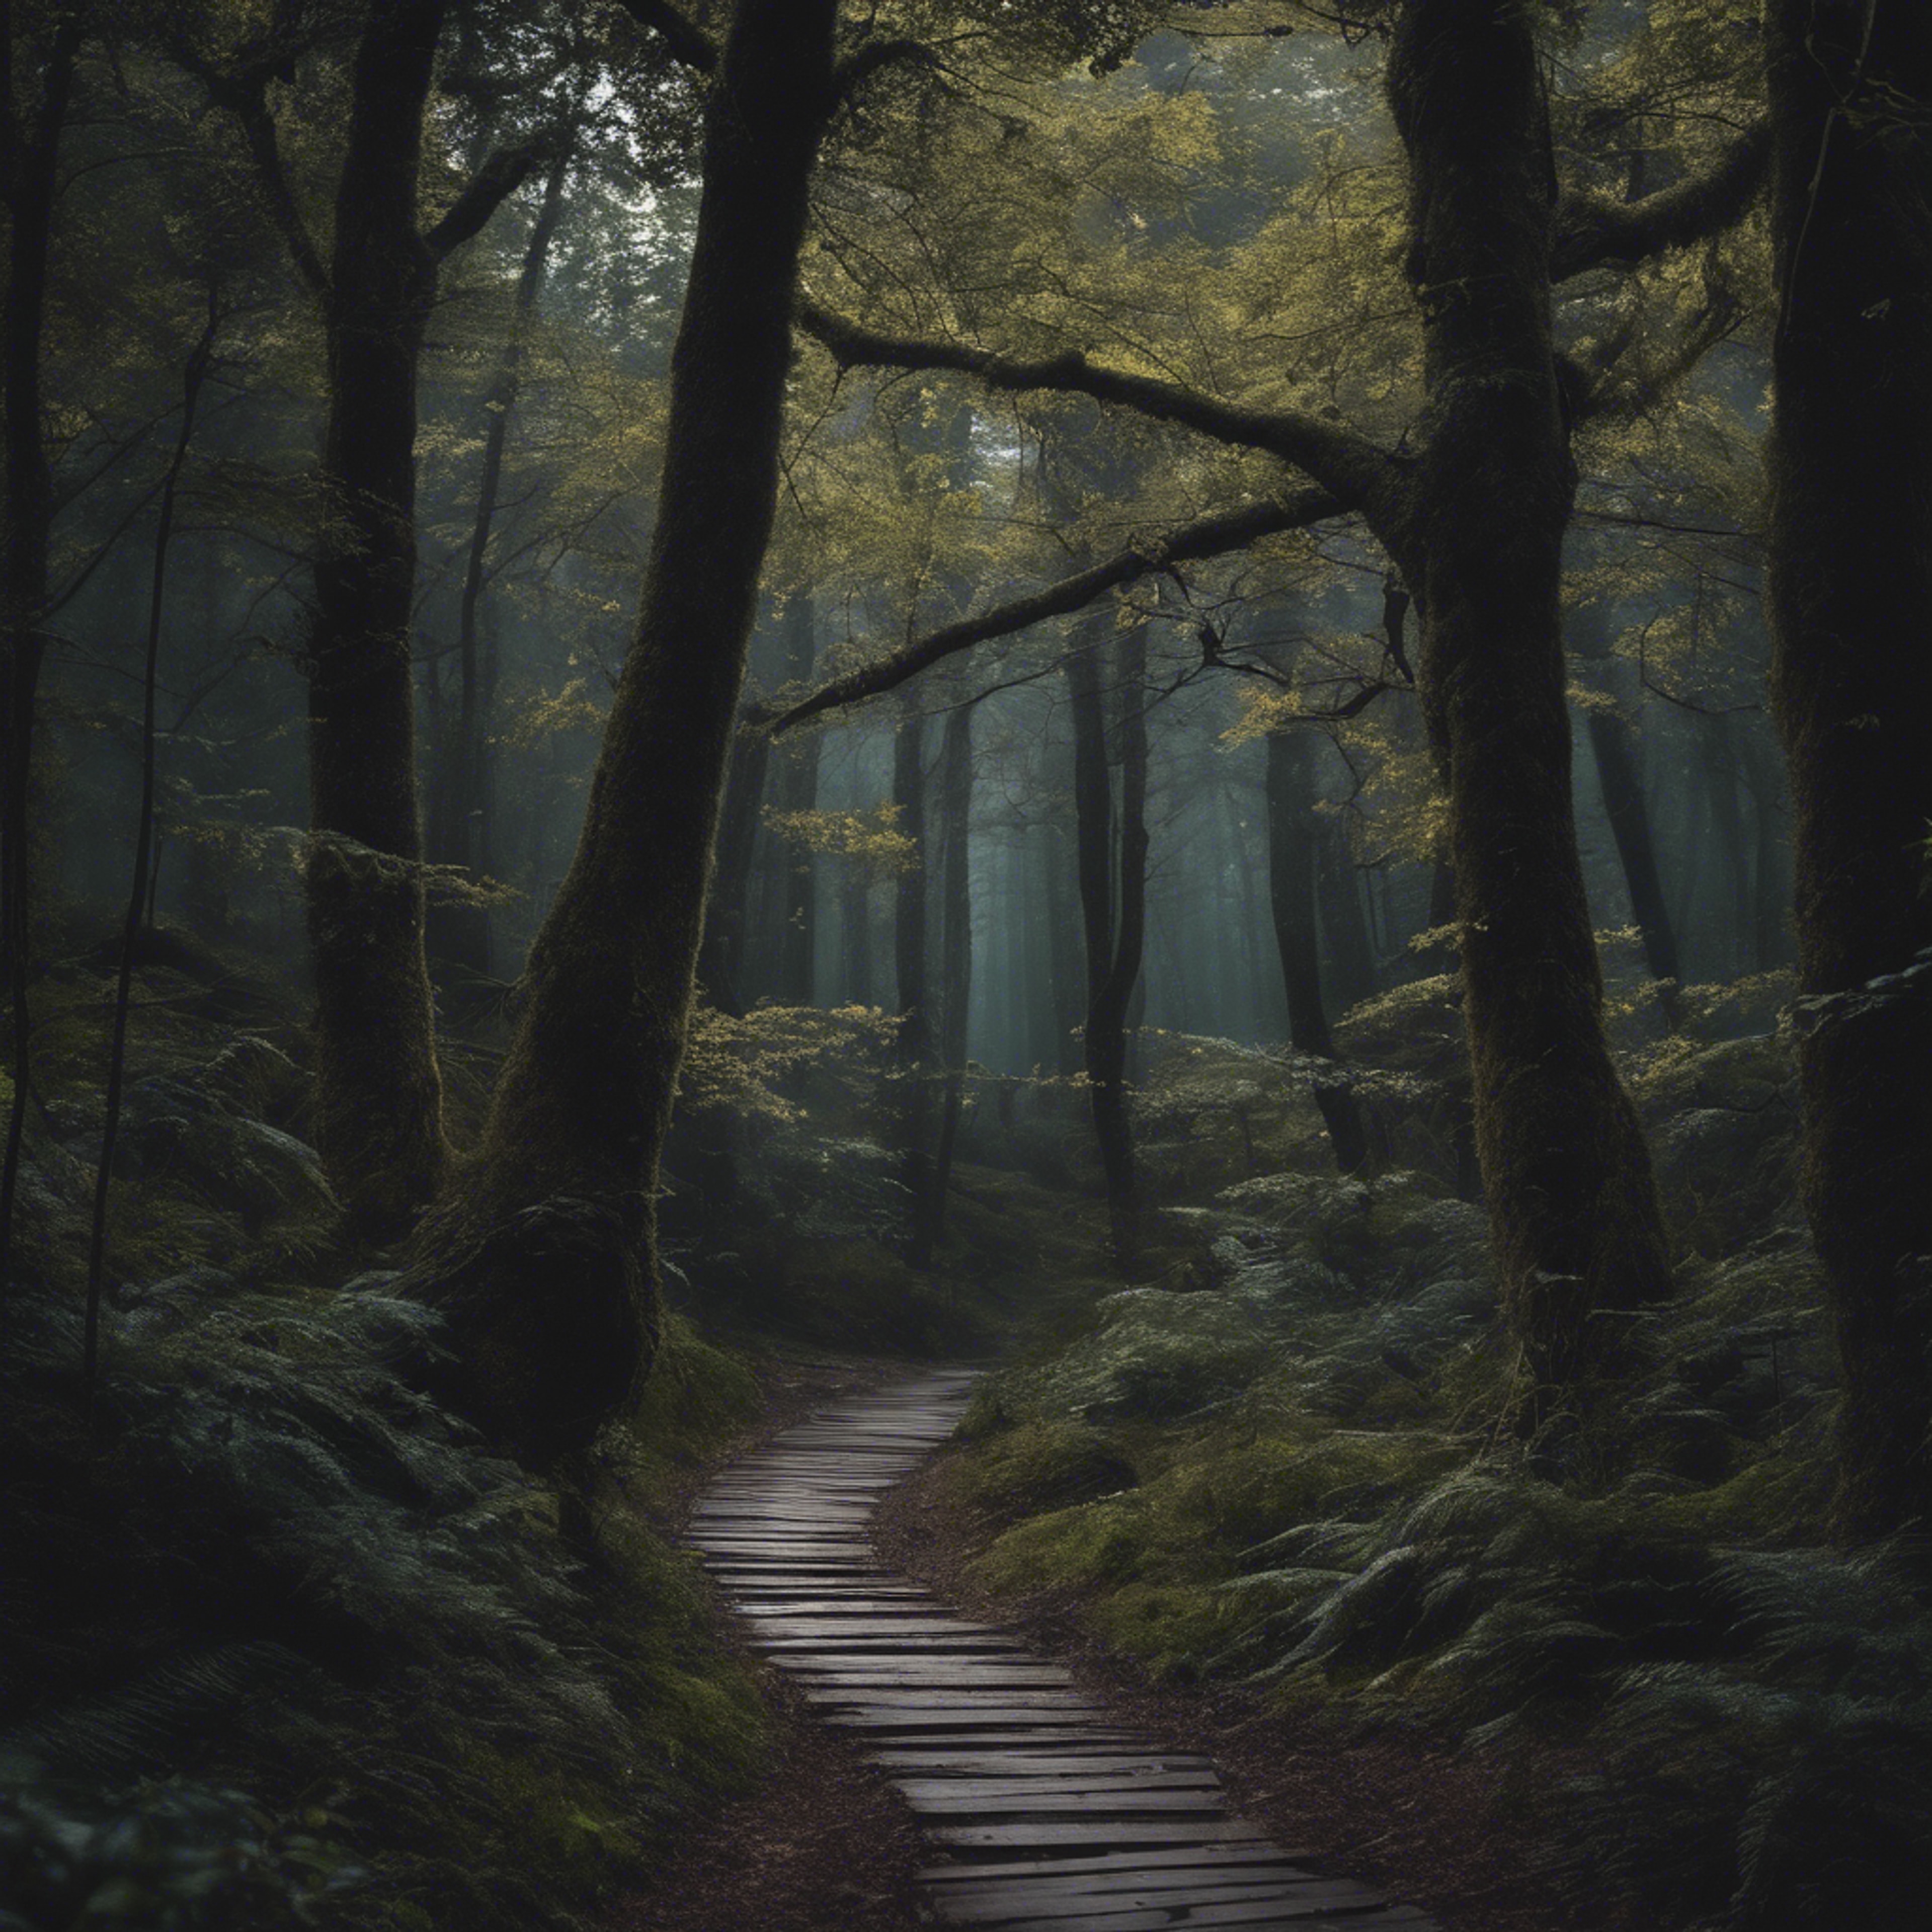 An untraveled path in a dark and mysterious forest Валлпапер[df6a1d860b87482e8c75]